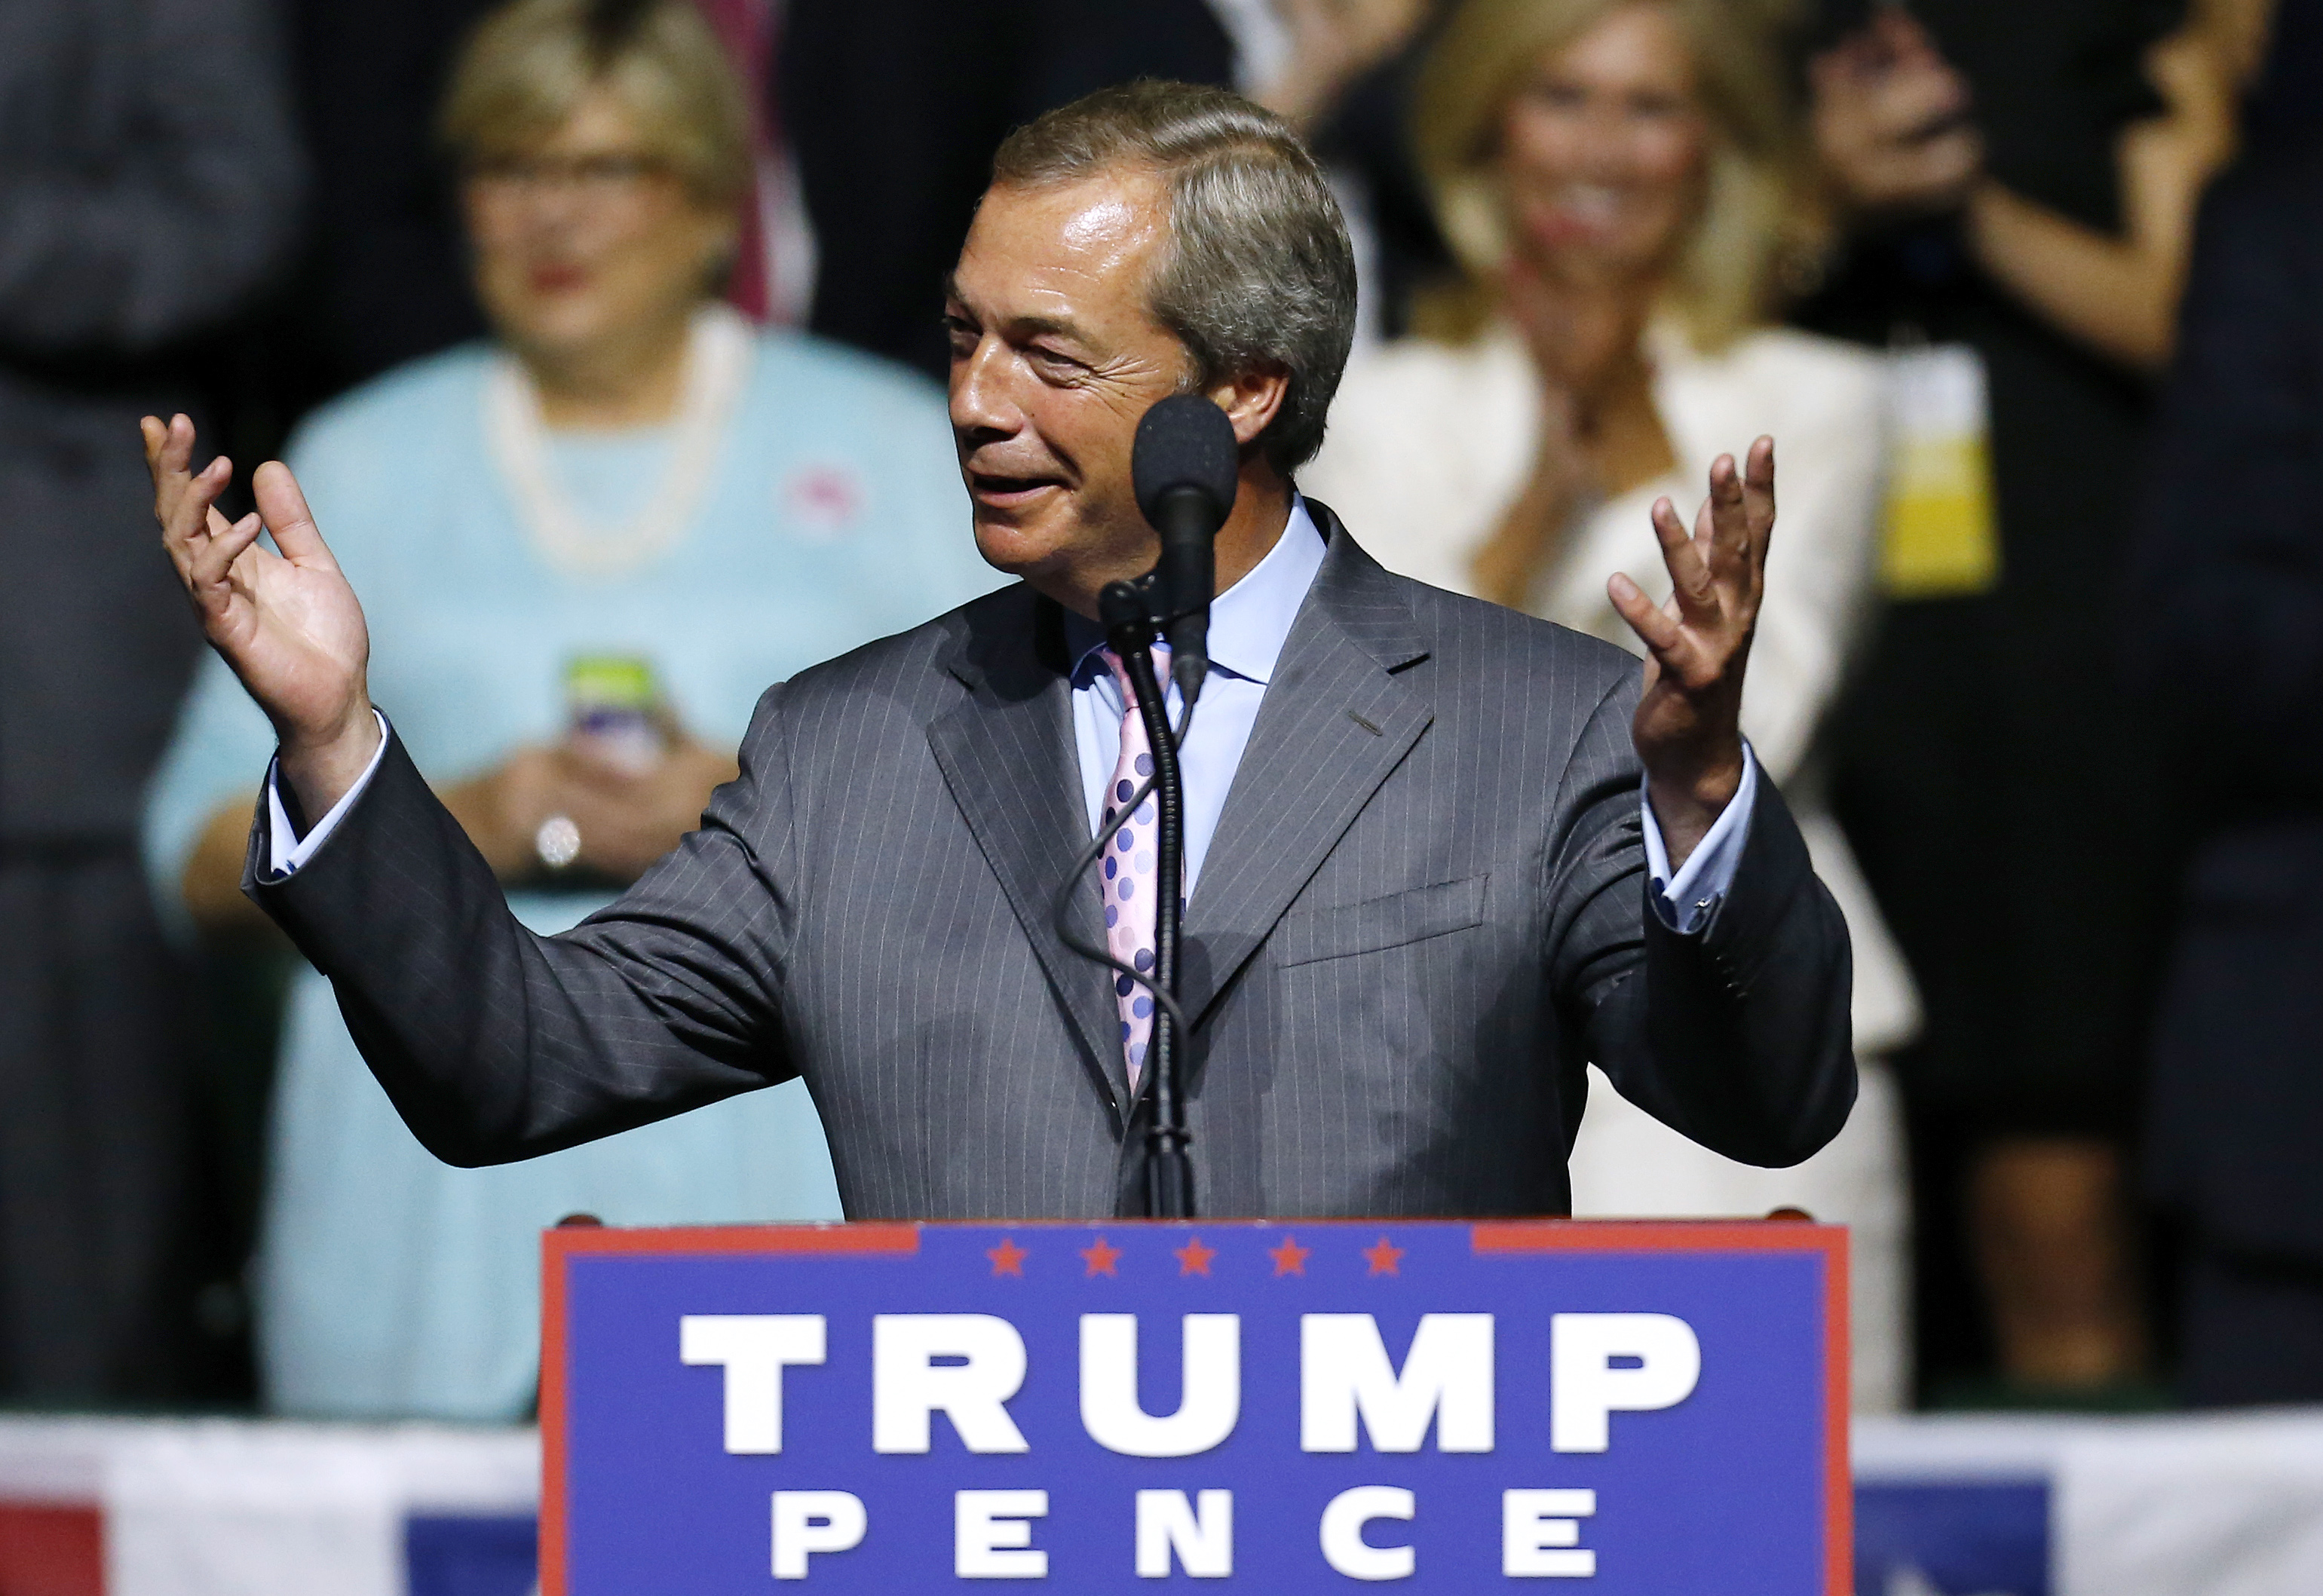 United Kingdom Independence Party leader Nigel Farage speaks during a campaign rally for Republican Presidential nominee Donald Trump at the Mississippi Coliseum on August 24, 2016 in Jackson, Mississippi.